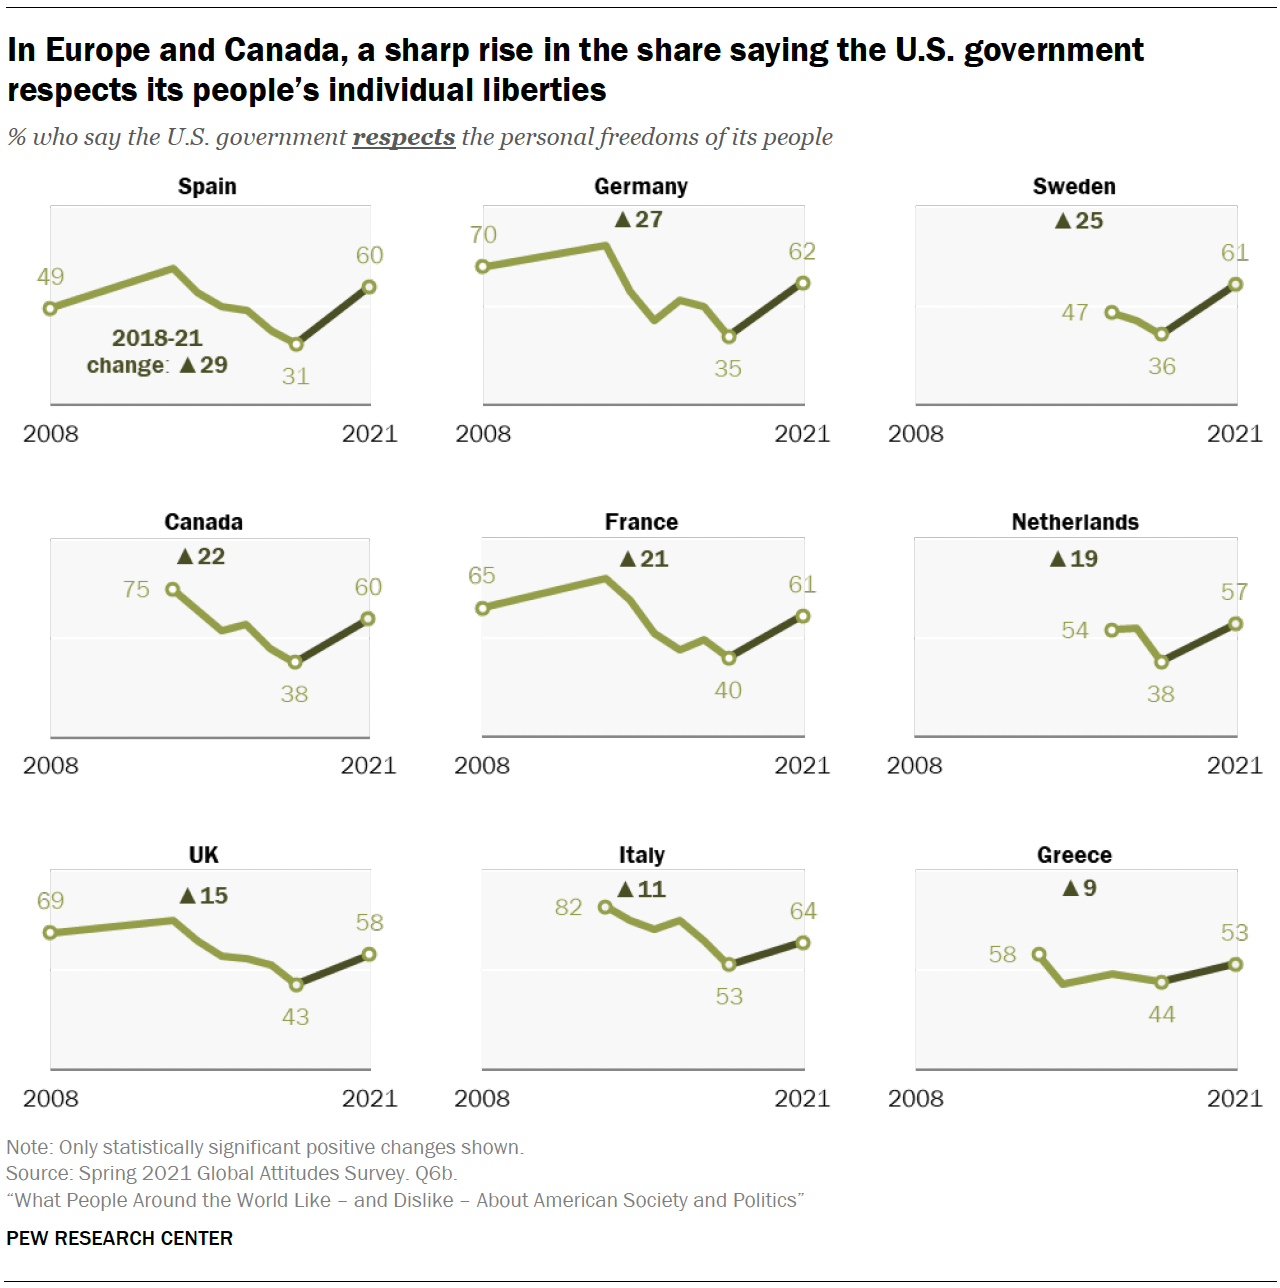 In Europe and Canada, a sharp rise in the share saying the U.S. government respects its people’s individual liberties